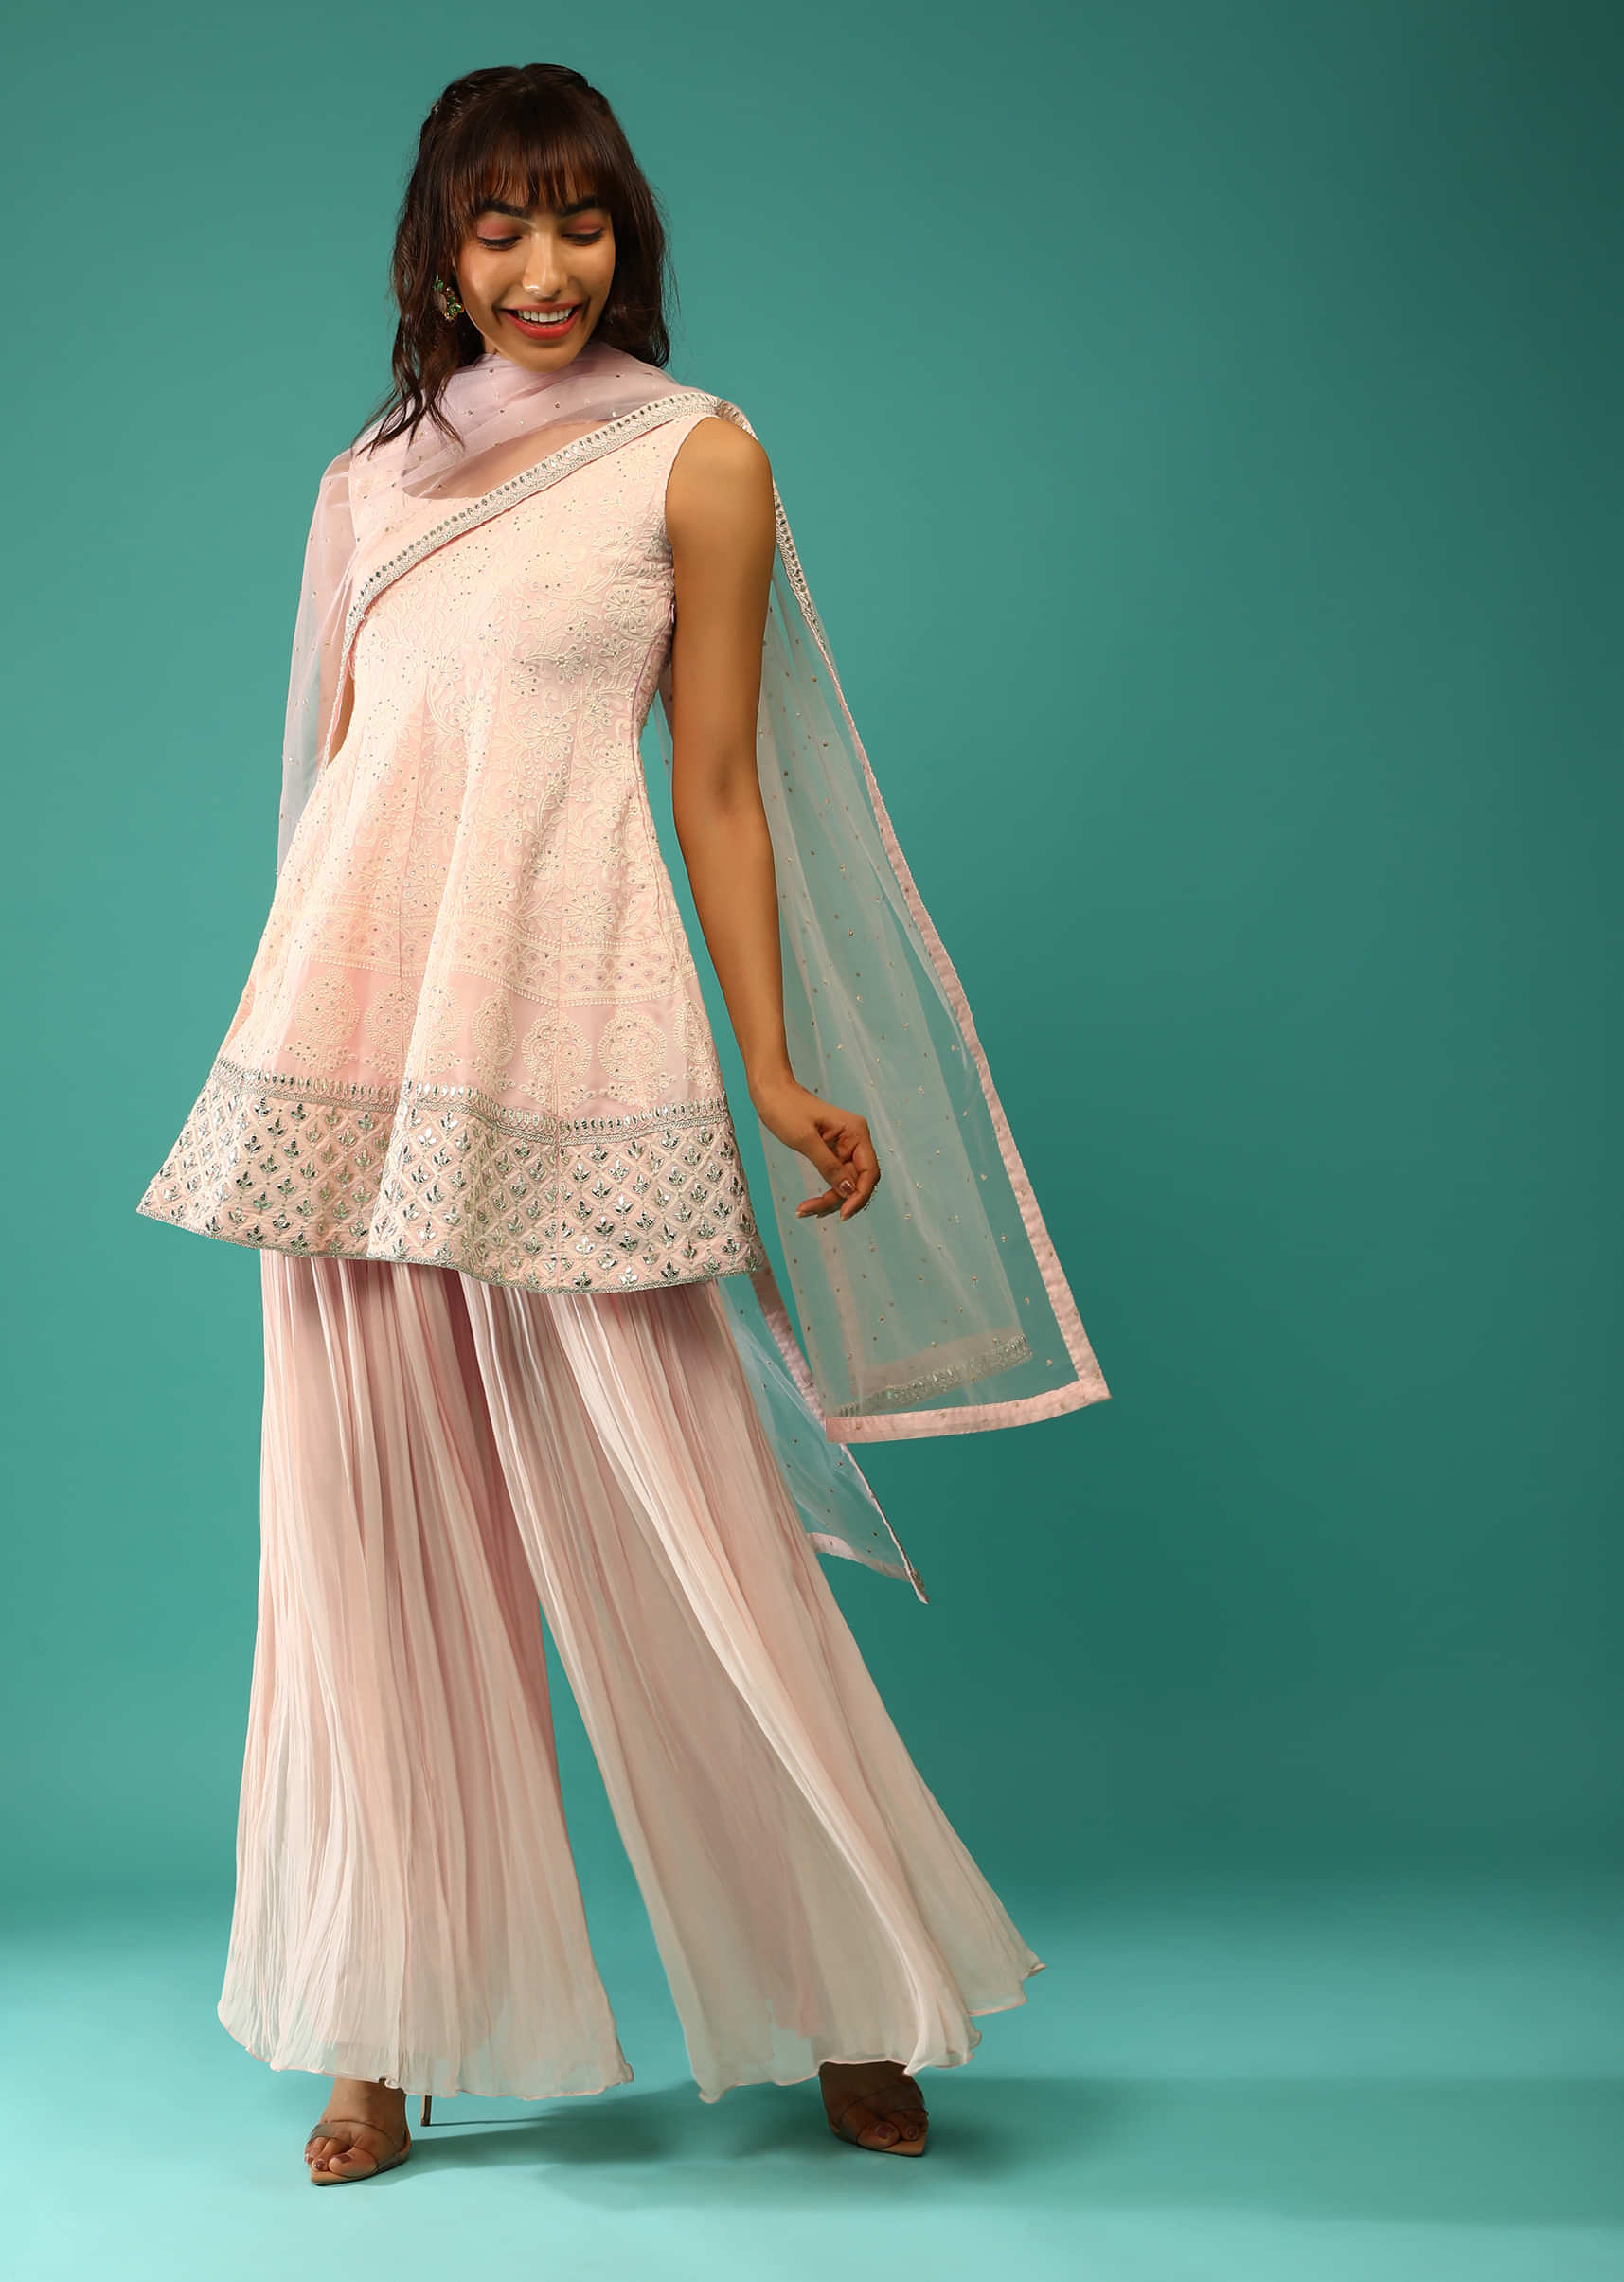 Powder Pink Palazzo Suit In Georgette With Peplum Styled Kurti Adorned In Lucknowi And Gotta Work  